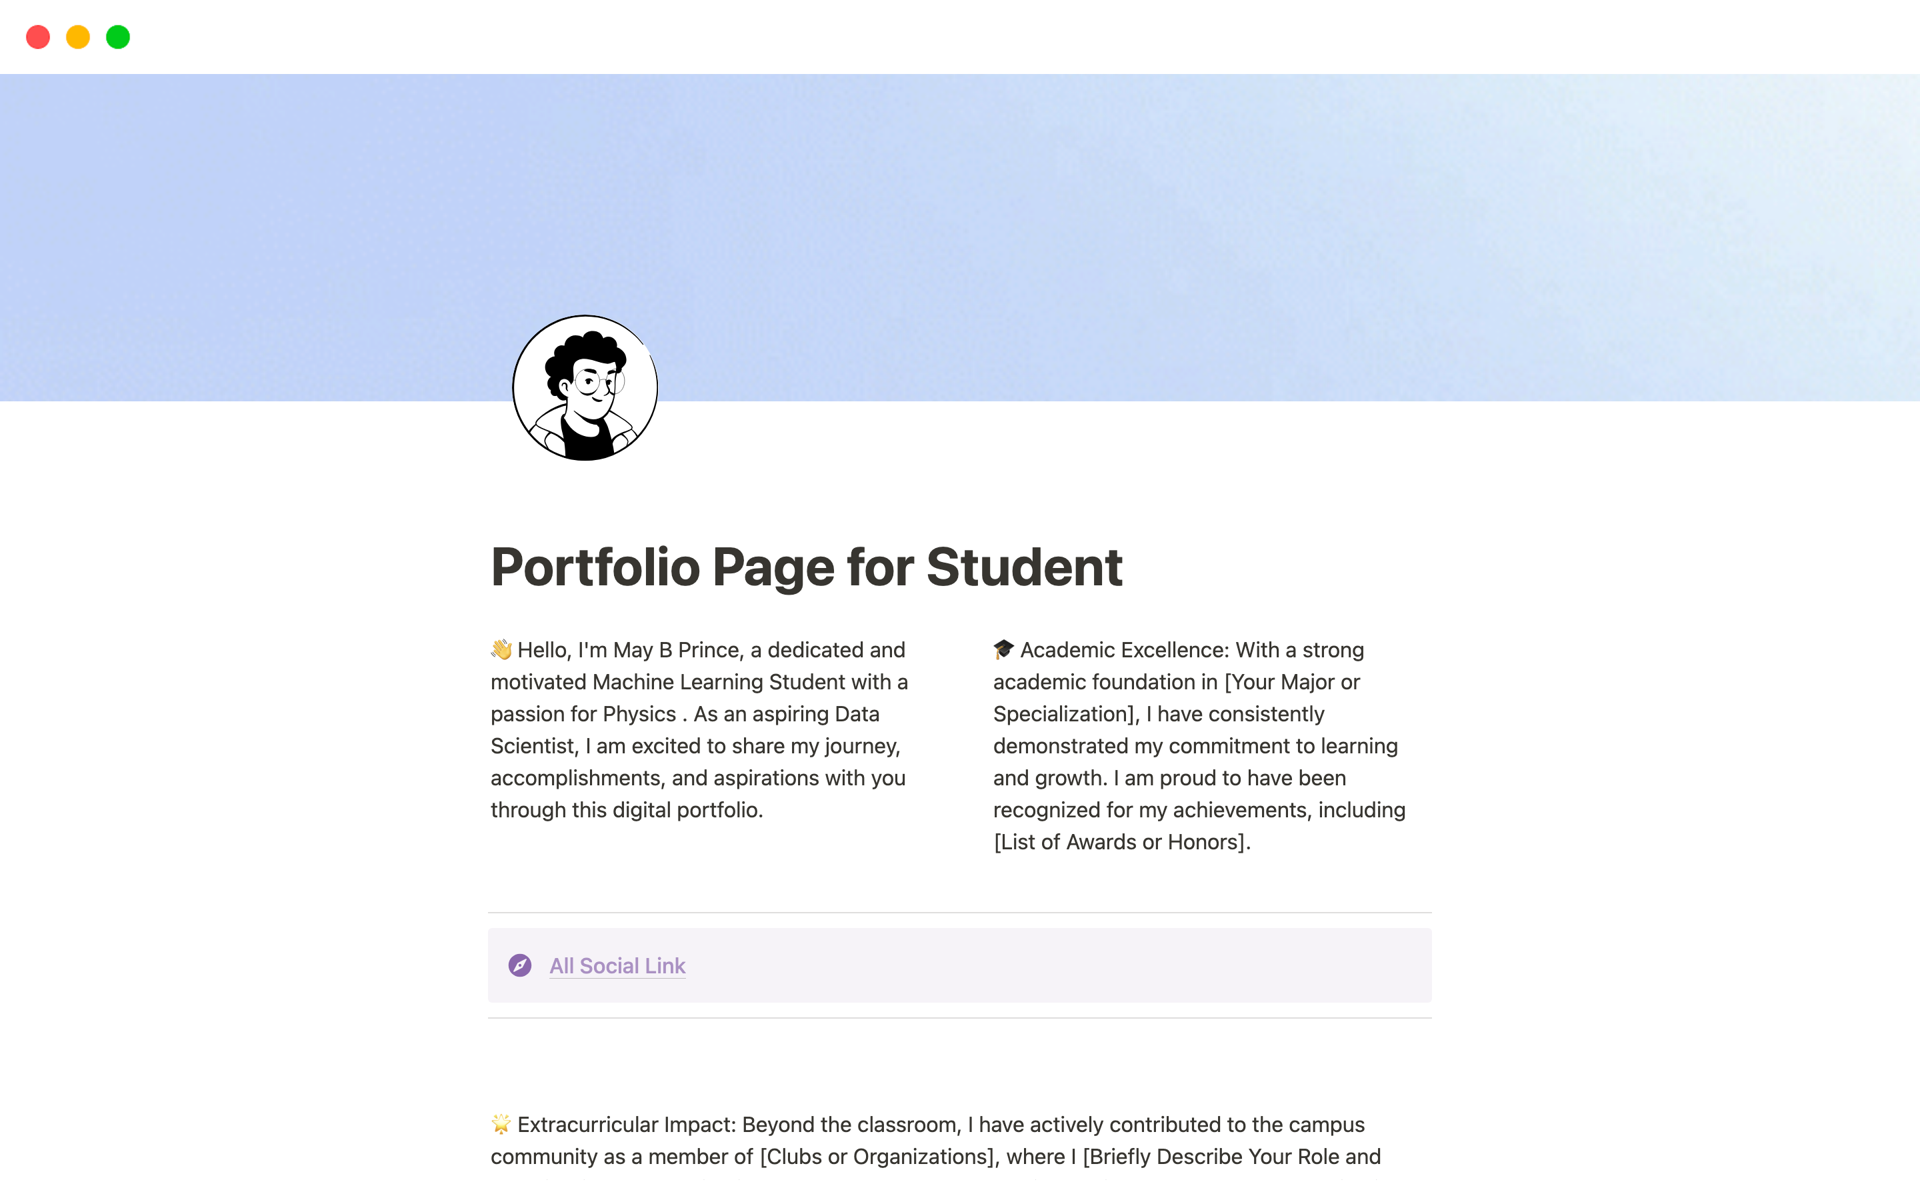 Craft a standout student portfolio effortlessly with our comprehensive Notion template, designed to impress and showcase your academic journey, skills, and accomplishments.